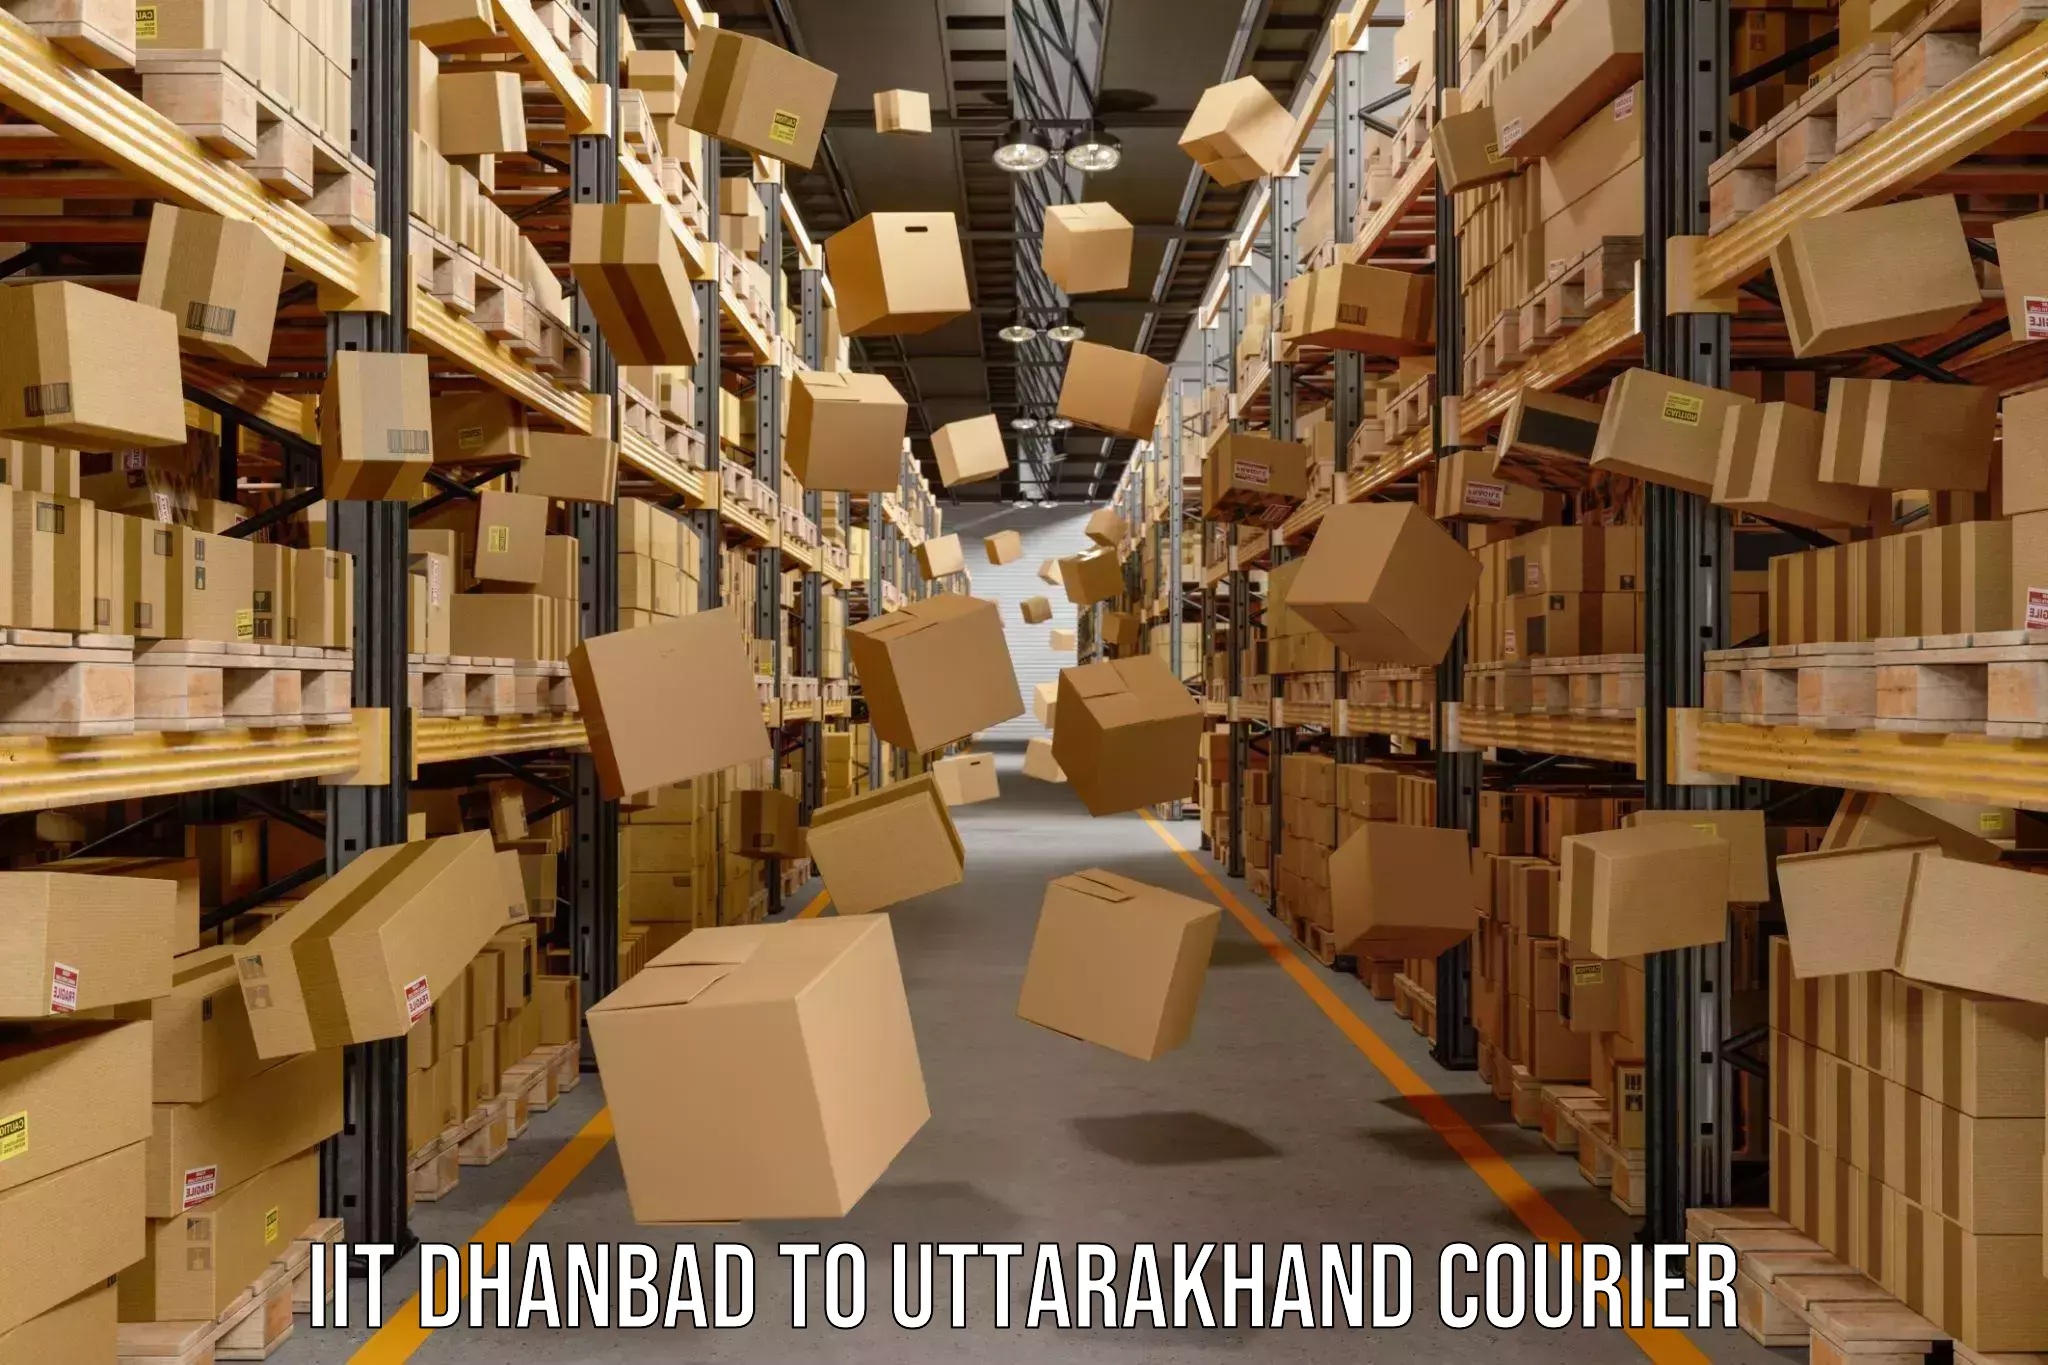 Advanced courier platforms IIT Dhanbad to Rudrapur